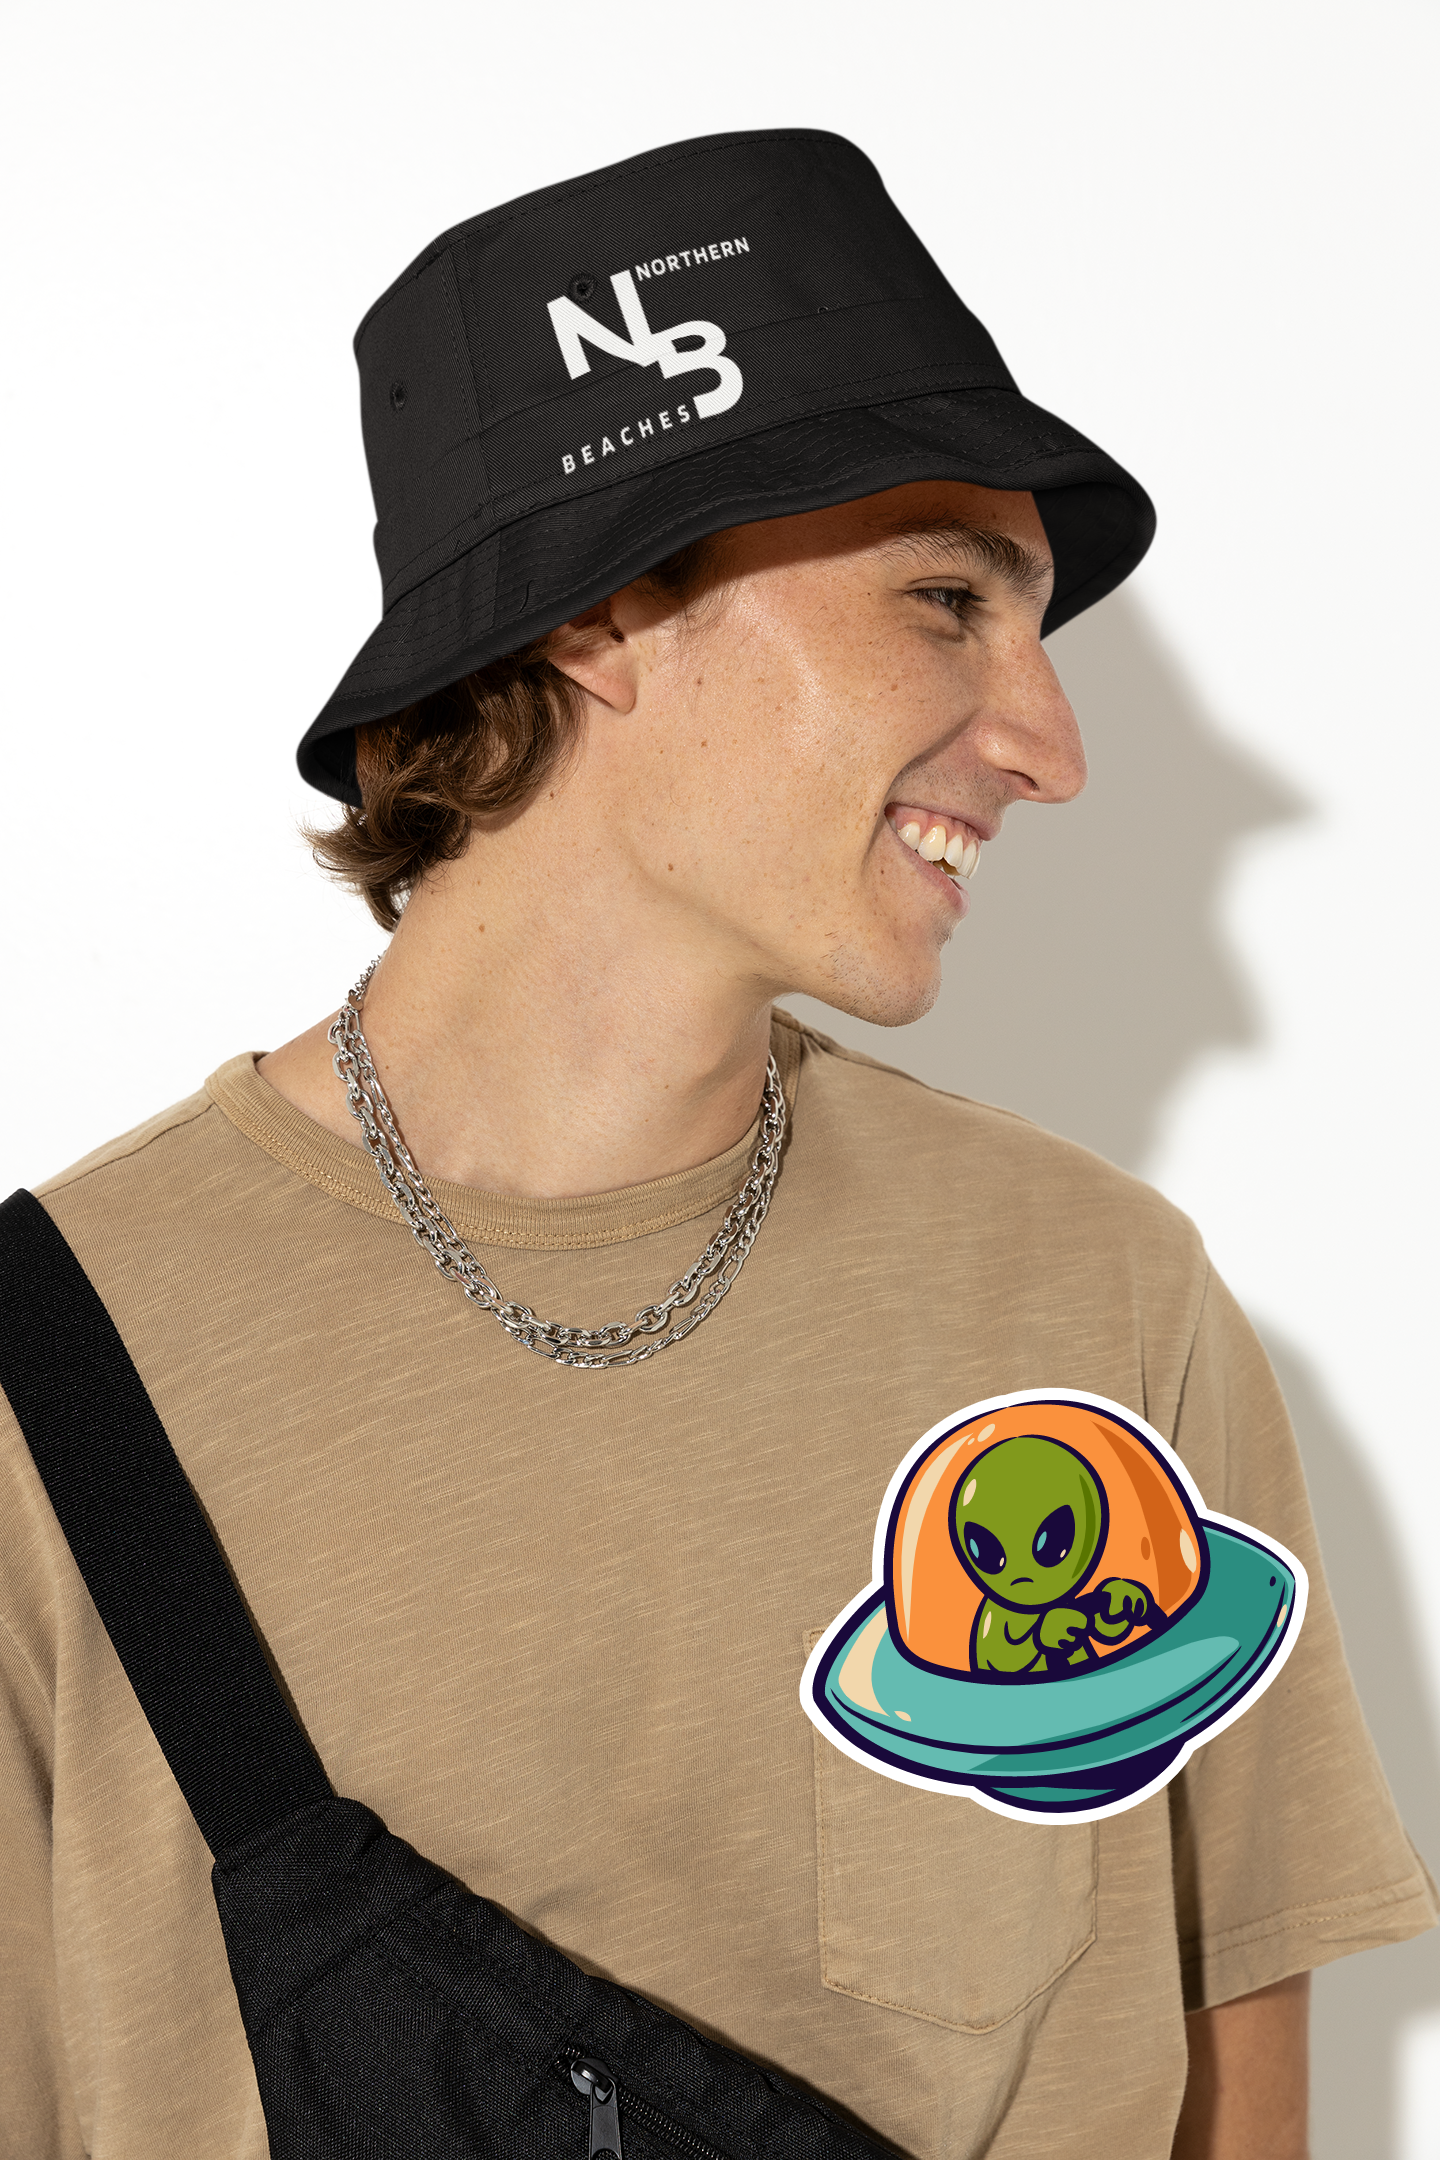 Got you Covered with our Northern Beaches logo HATS